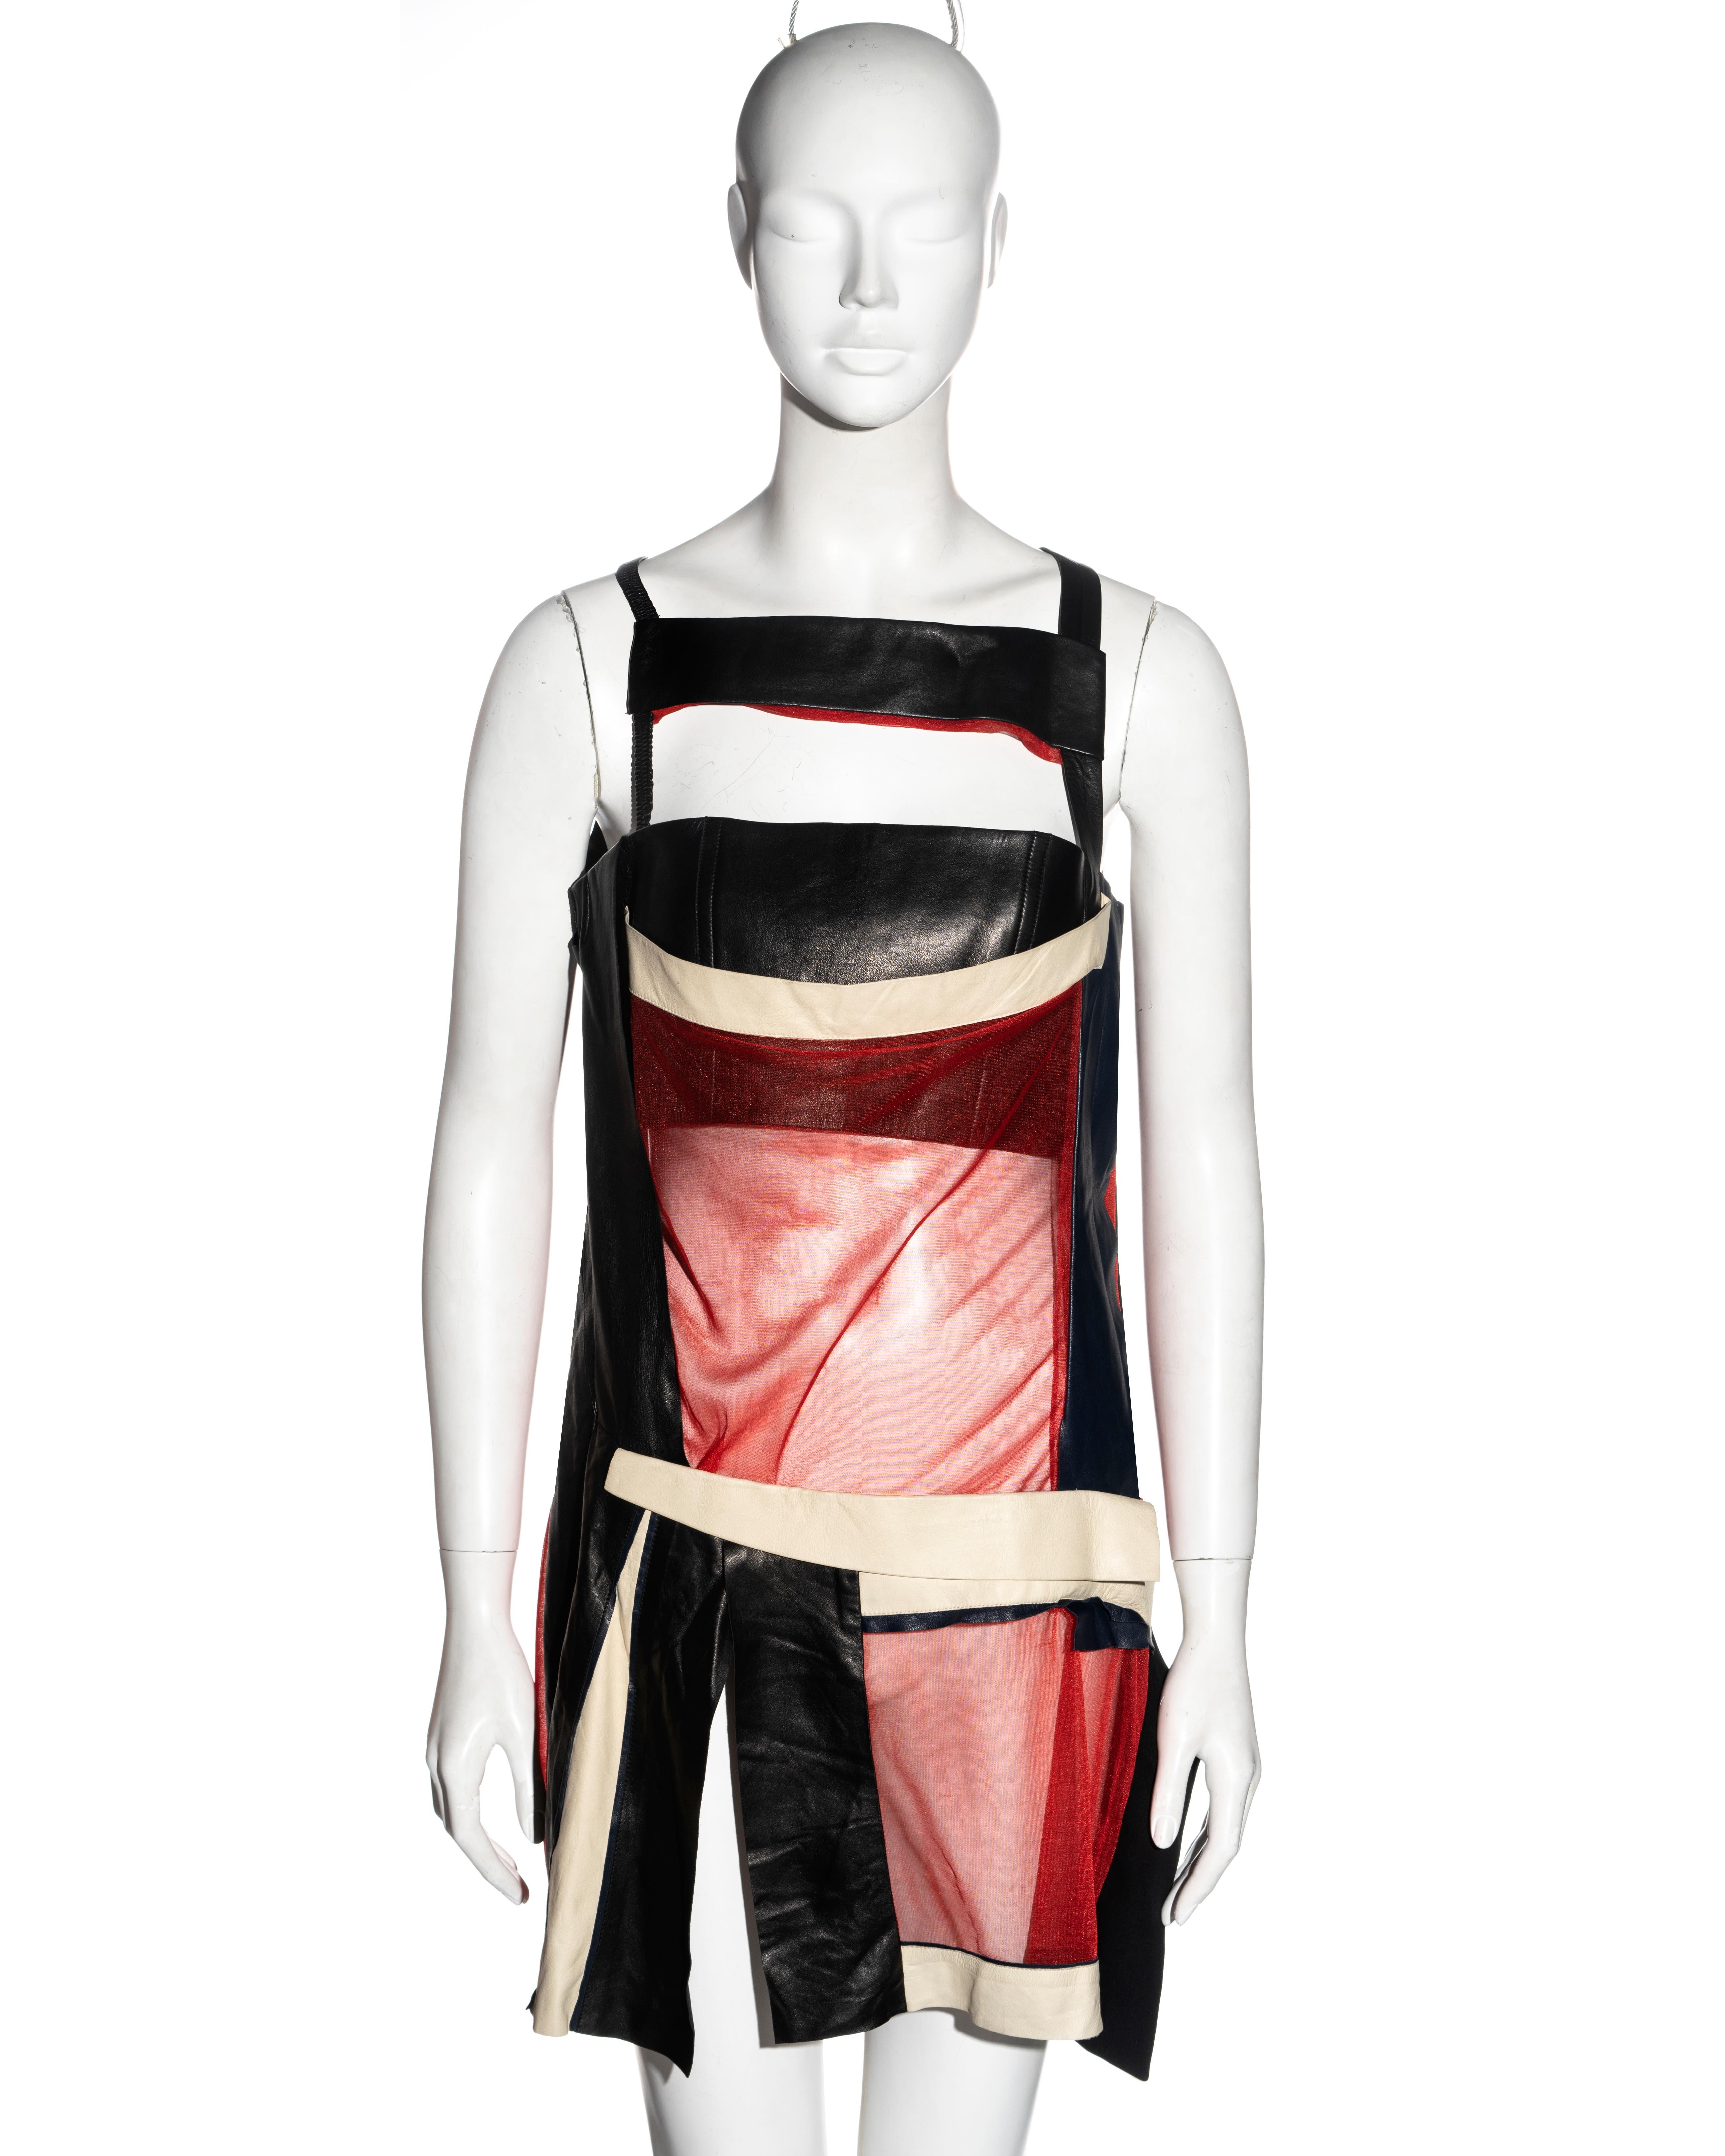 ▪ Balenciaga mixed media mini dress
▪ Designed by Nicolas Ghesquière
▪ Black and cream lambskin leather 
▪ Red chiffon inserts 
▪ Pleated mini skirt 
▪ Built-in bustier 
▪ Harness-style bodice 
▪ FR 38 - UK 10 - US 6
▪ Spring-Summer 2010
▪ 50%